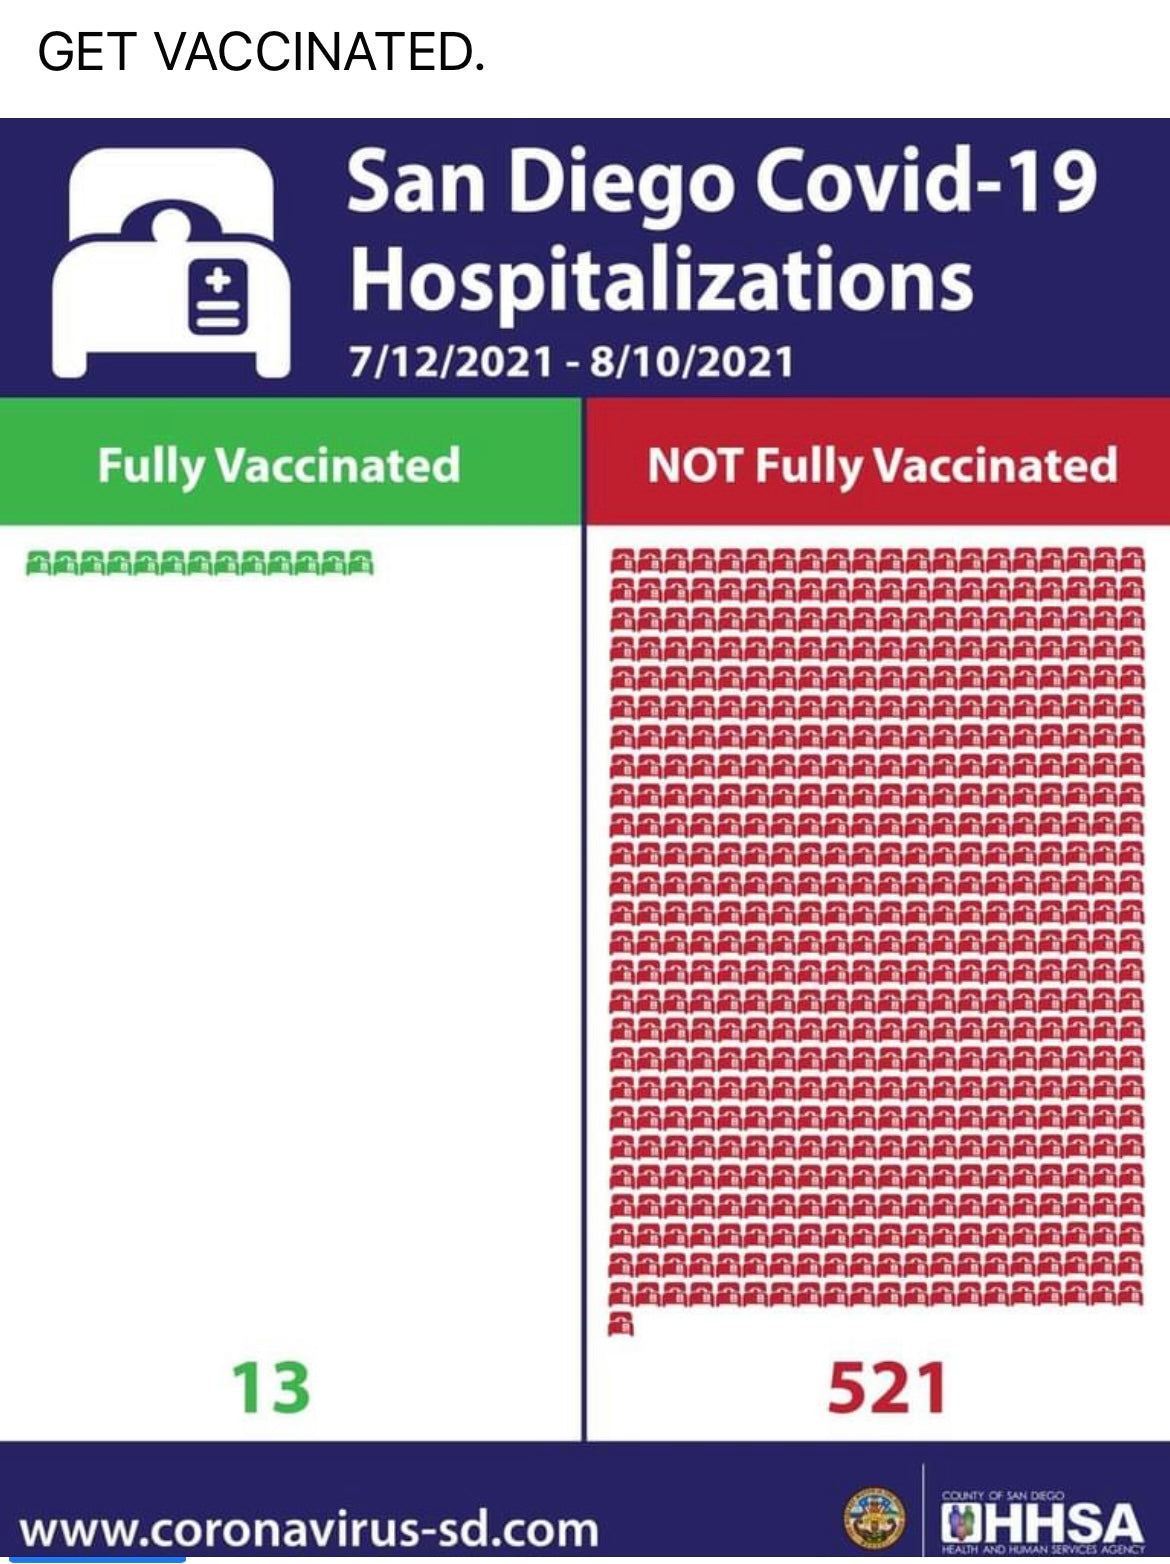 Hospital Charting tells the story, get vaxed